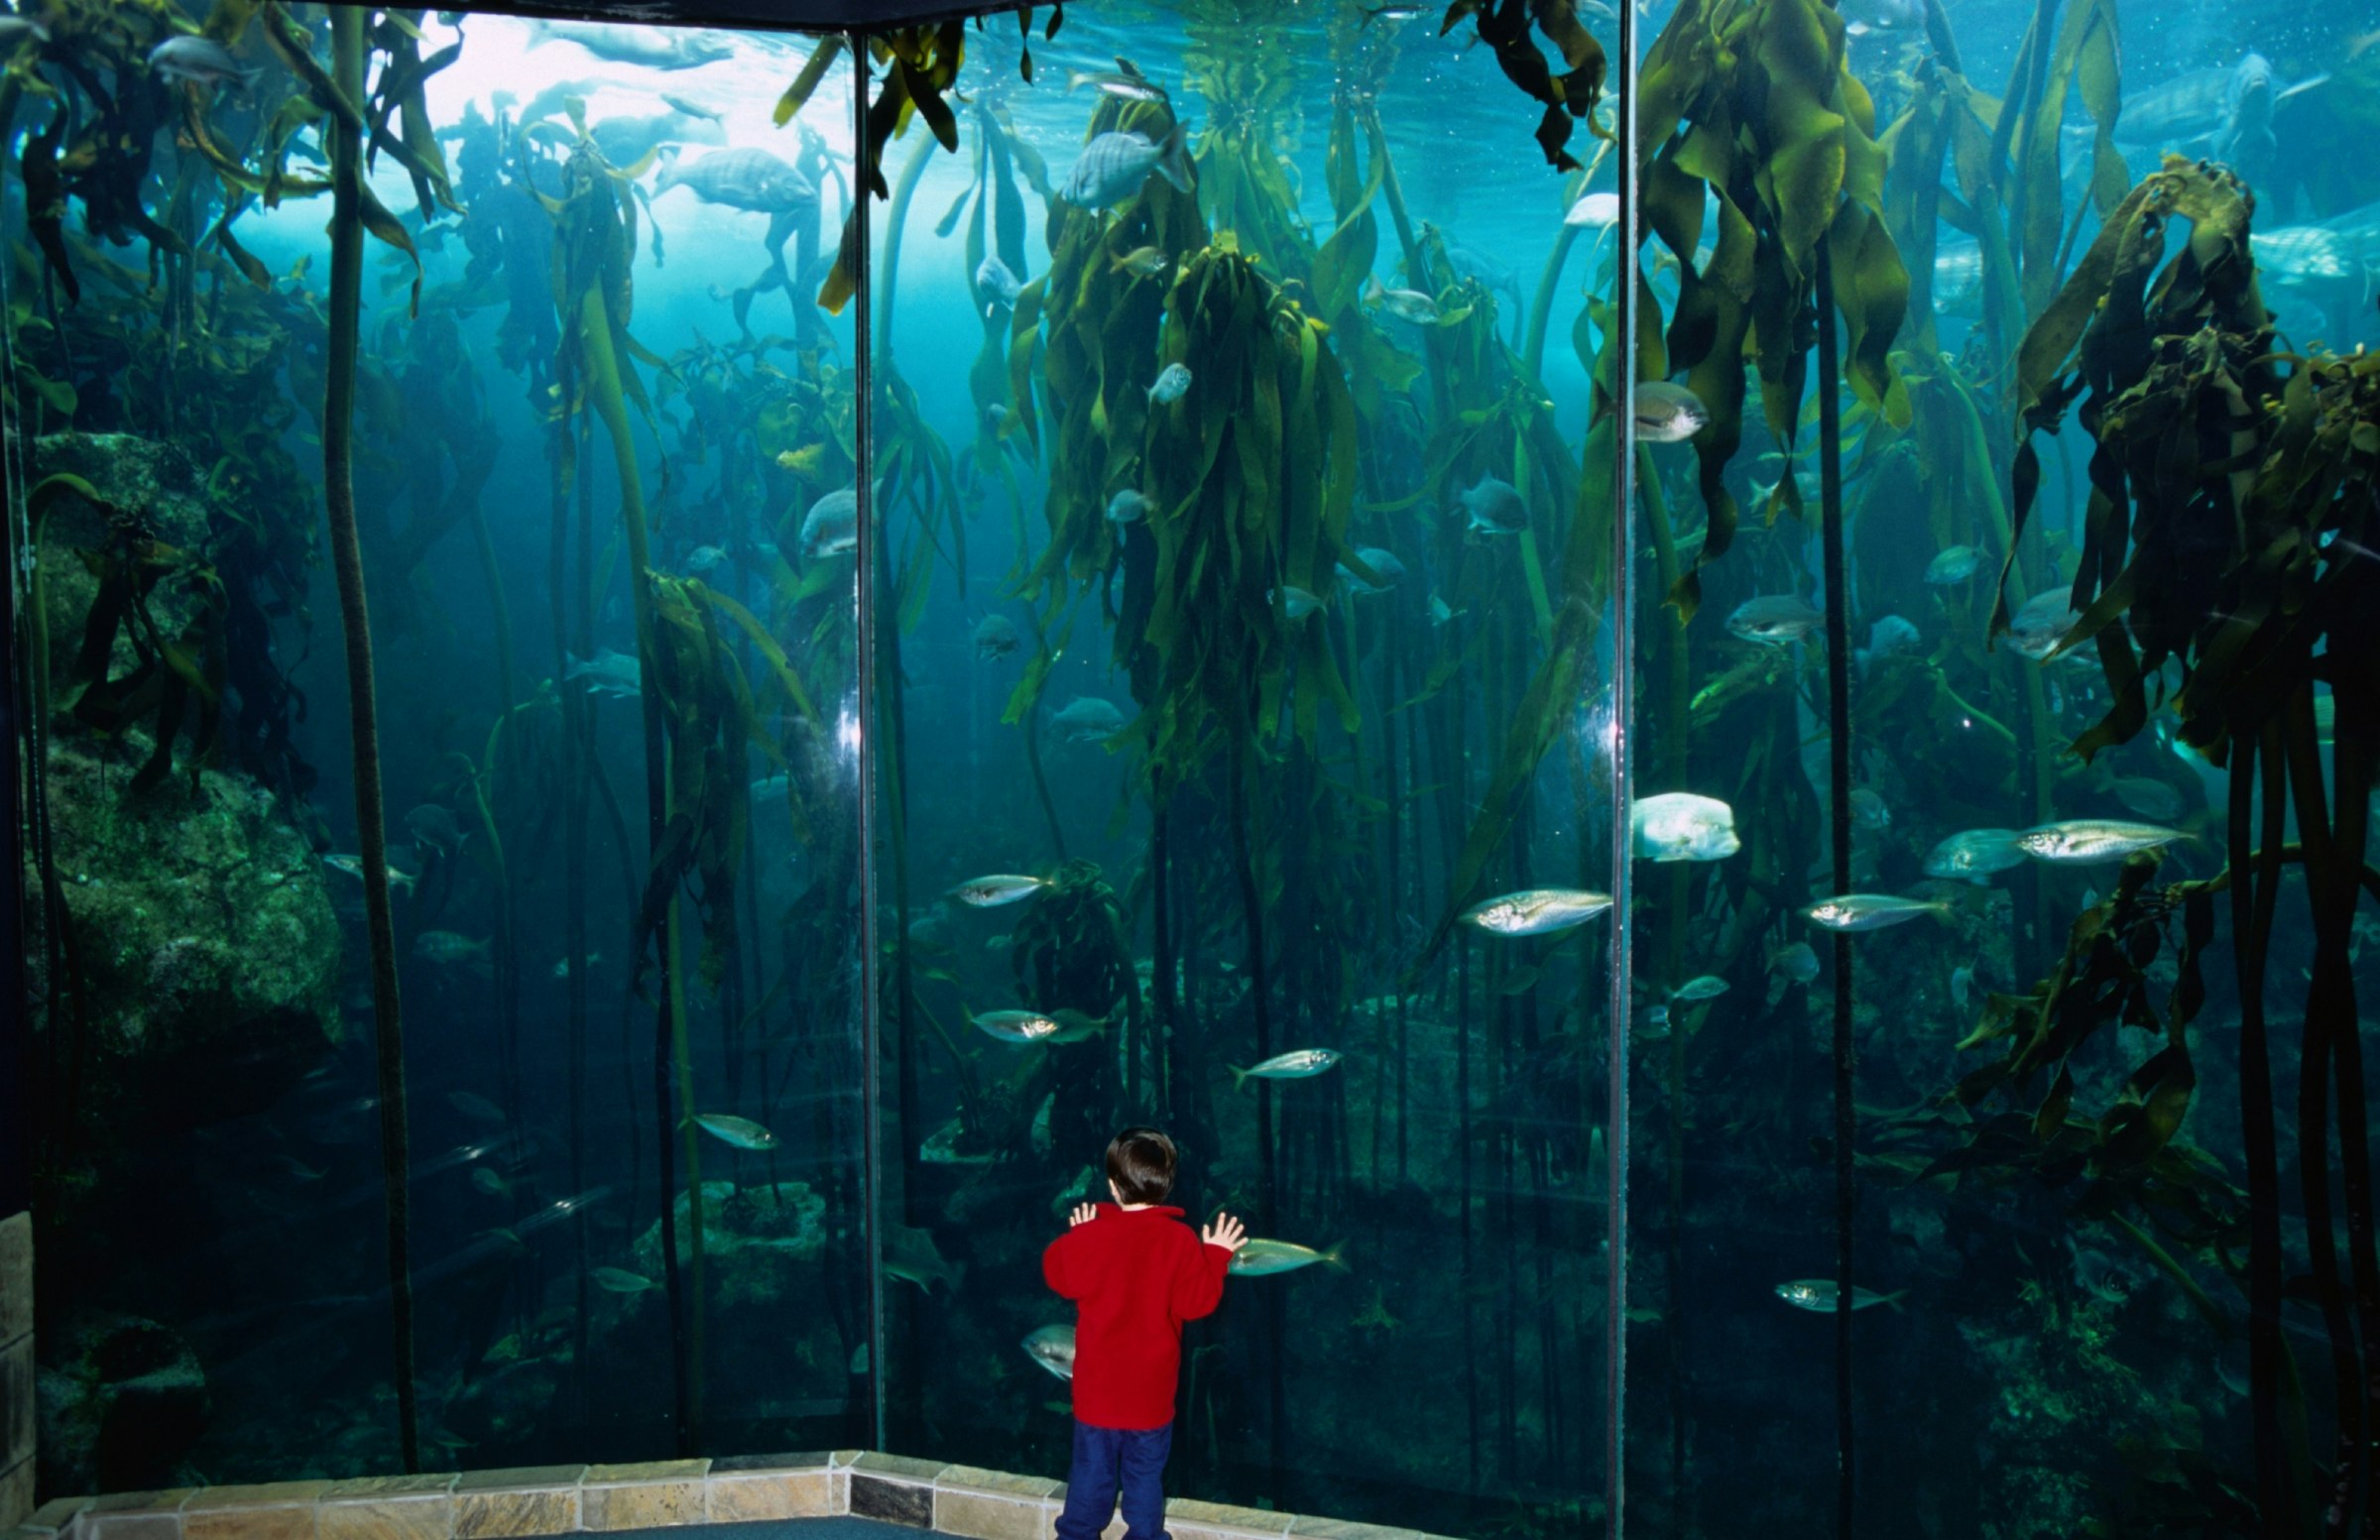 A young child of five or six stands with face and hands pressed up against a massive glass wall, behind which is a sea of fish, kelp and other marine life.